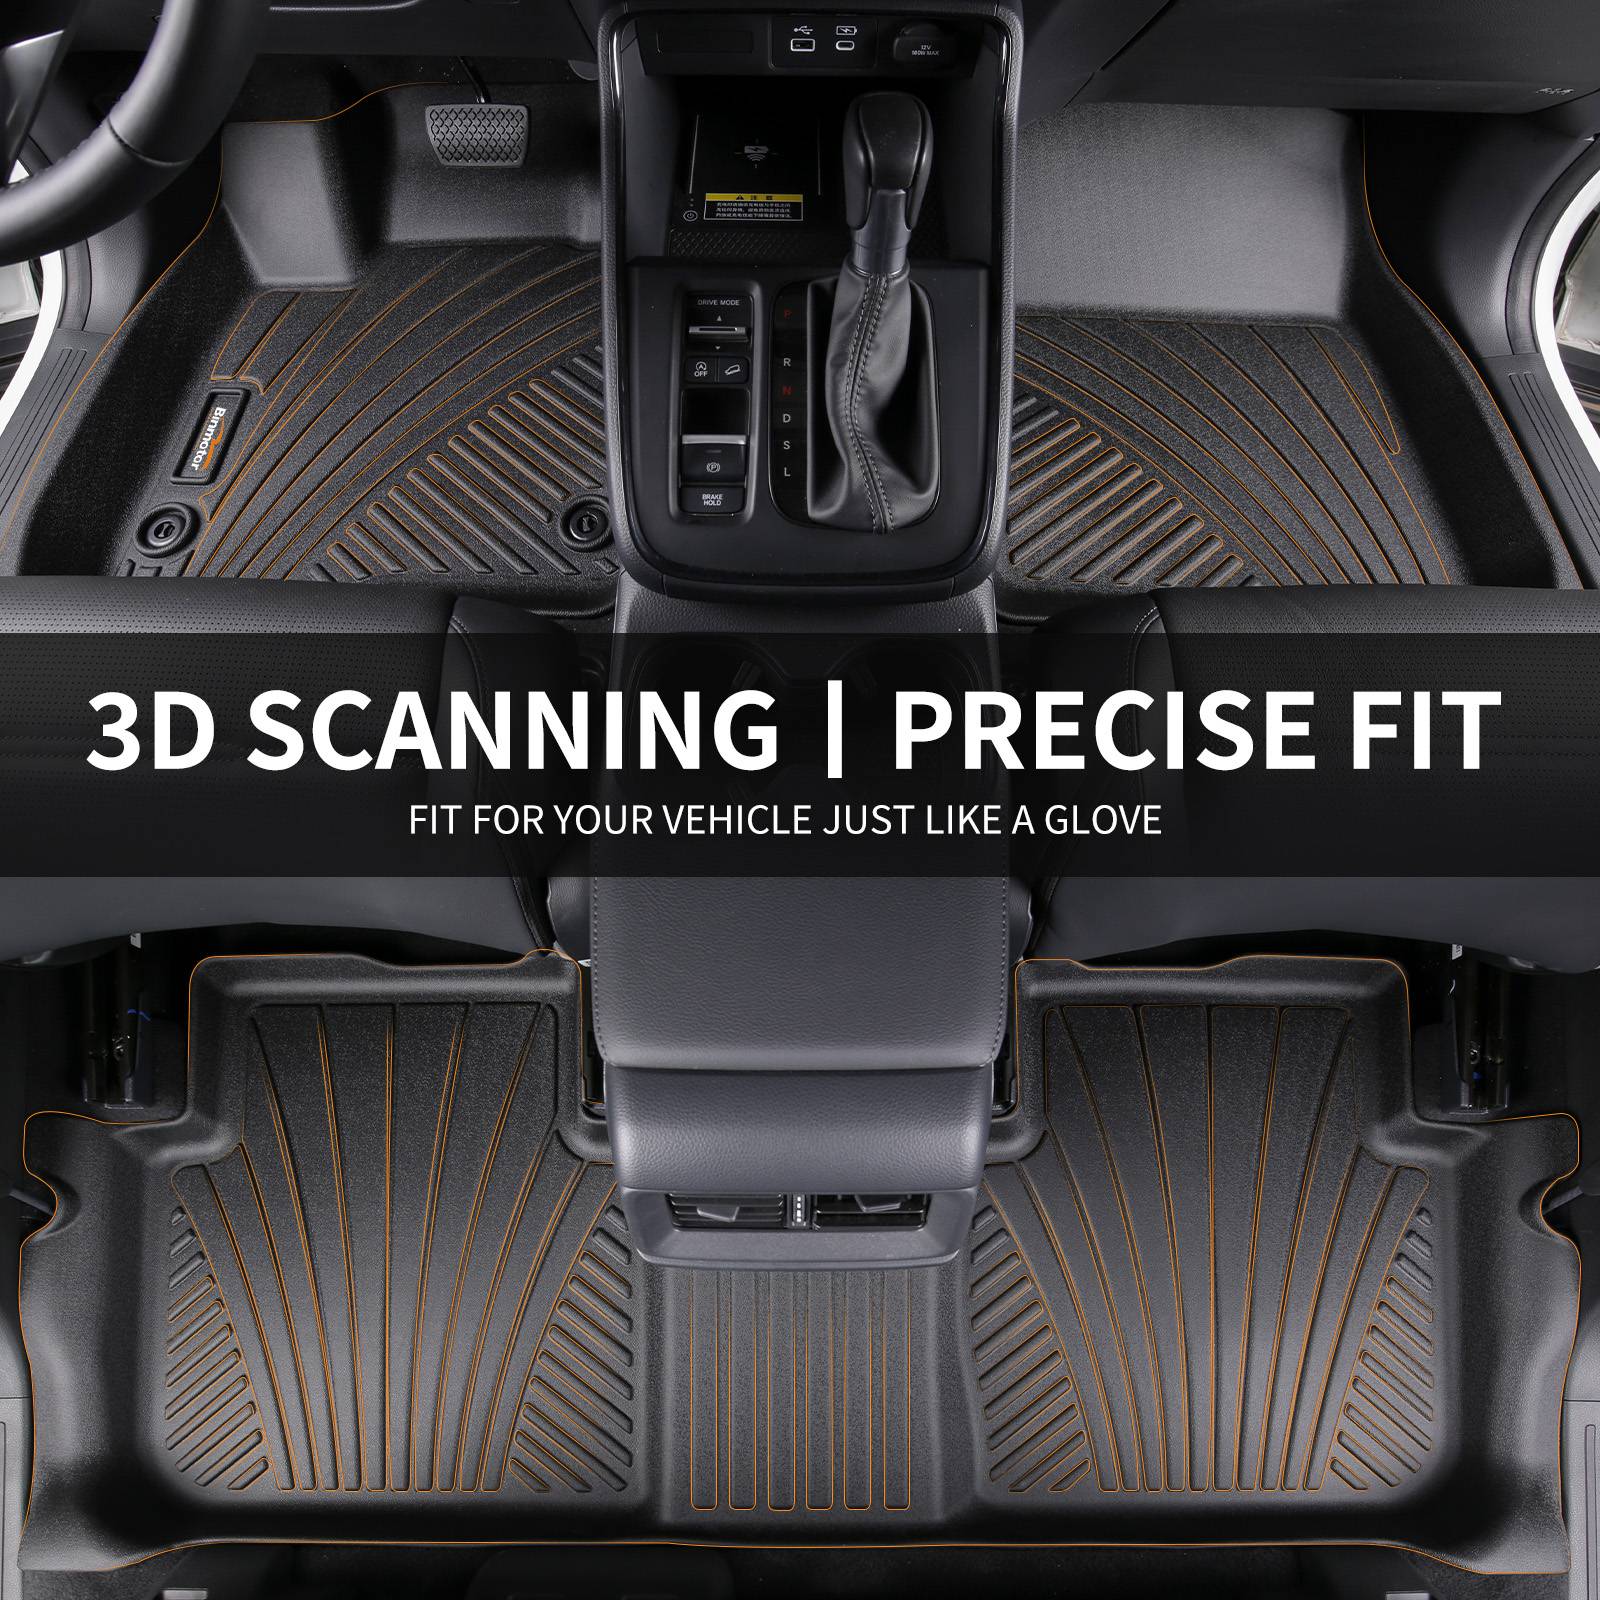 Binmotor-Floor Mats for Mazda CX-9 6 Passenger(The 2nd Row Bucket Seats Without Center Console), All Weather Car Floor Liners（compatible year 2020-2023）